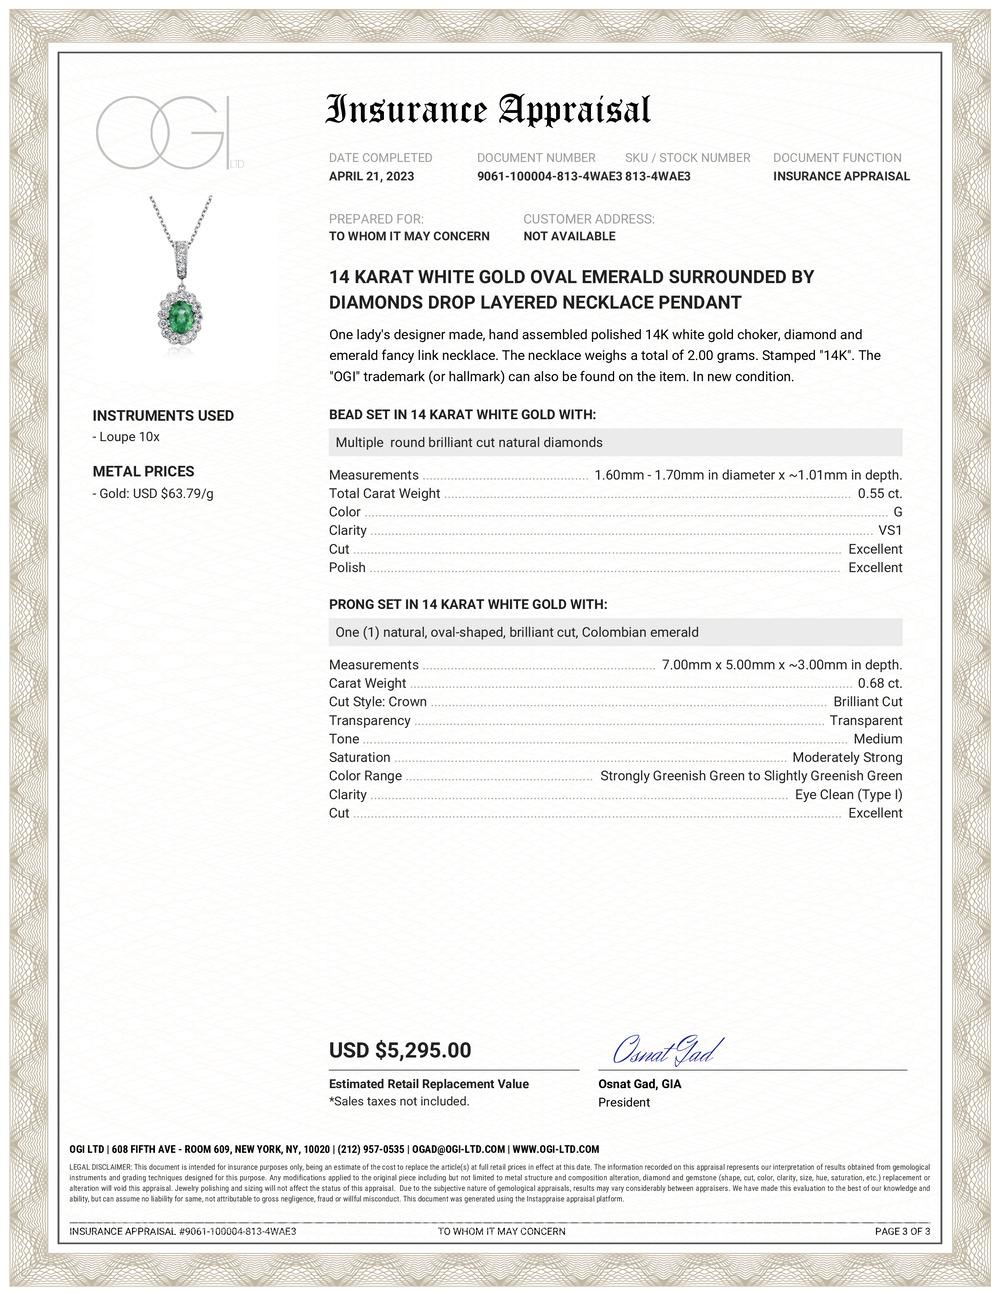 Fourteen karats white gold trending layered necklace pendant with oval-shaped emerald and surrounded by diamonds 
Fine quality oval-shaped emerald weighing 0.70 carat
Diamond weighing 0.68 carats
Emerald hue tone color grass green
Dropped pendant